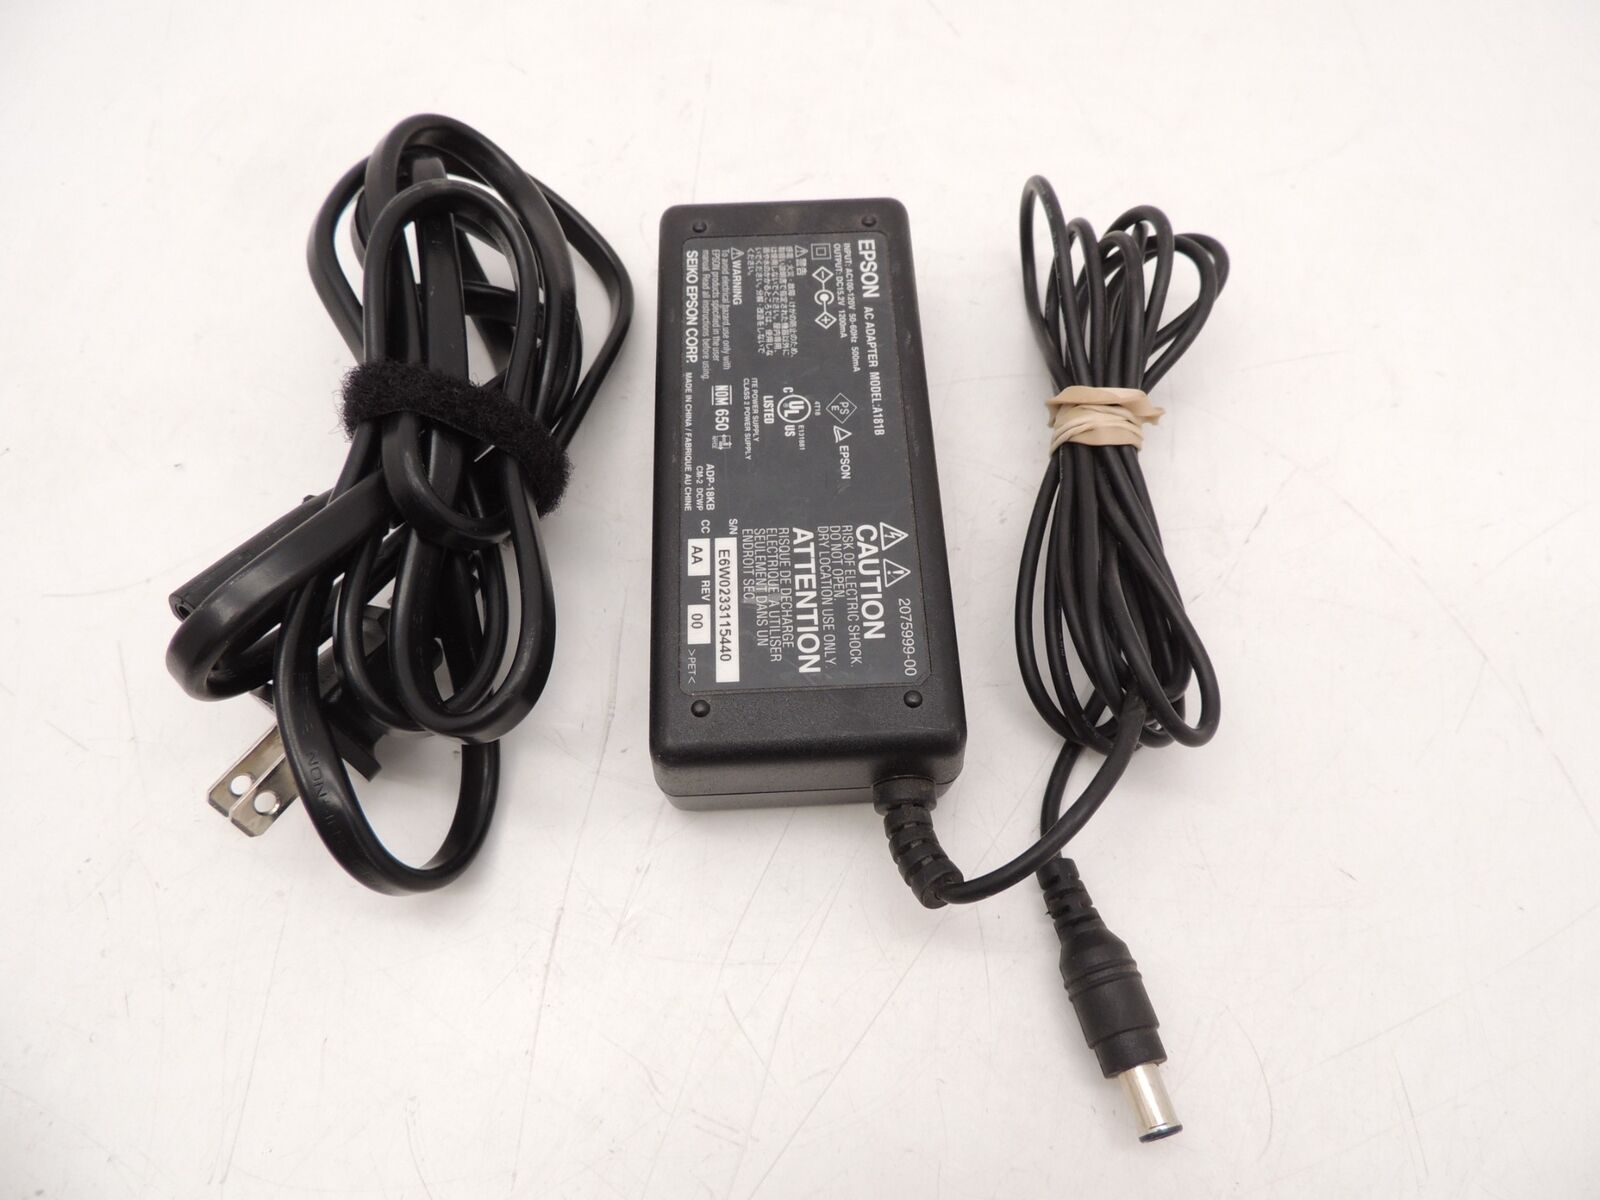 Epson A181B Power Adapter Power Supply Charger Cable 15.2 Volts 1200mA